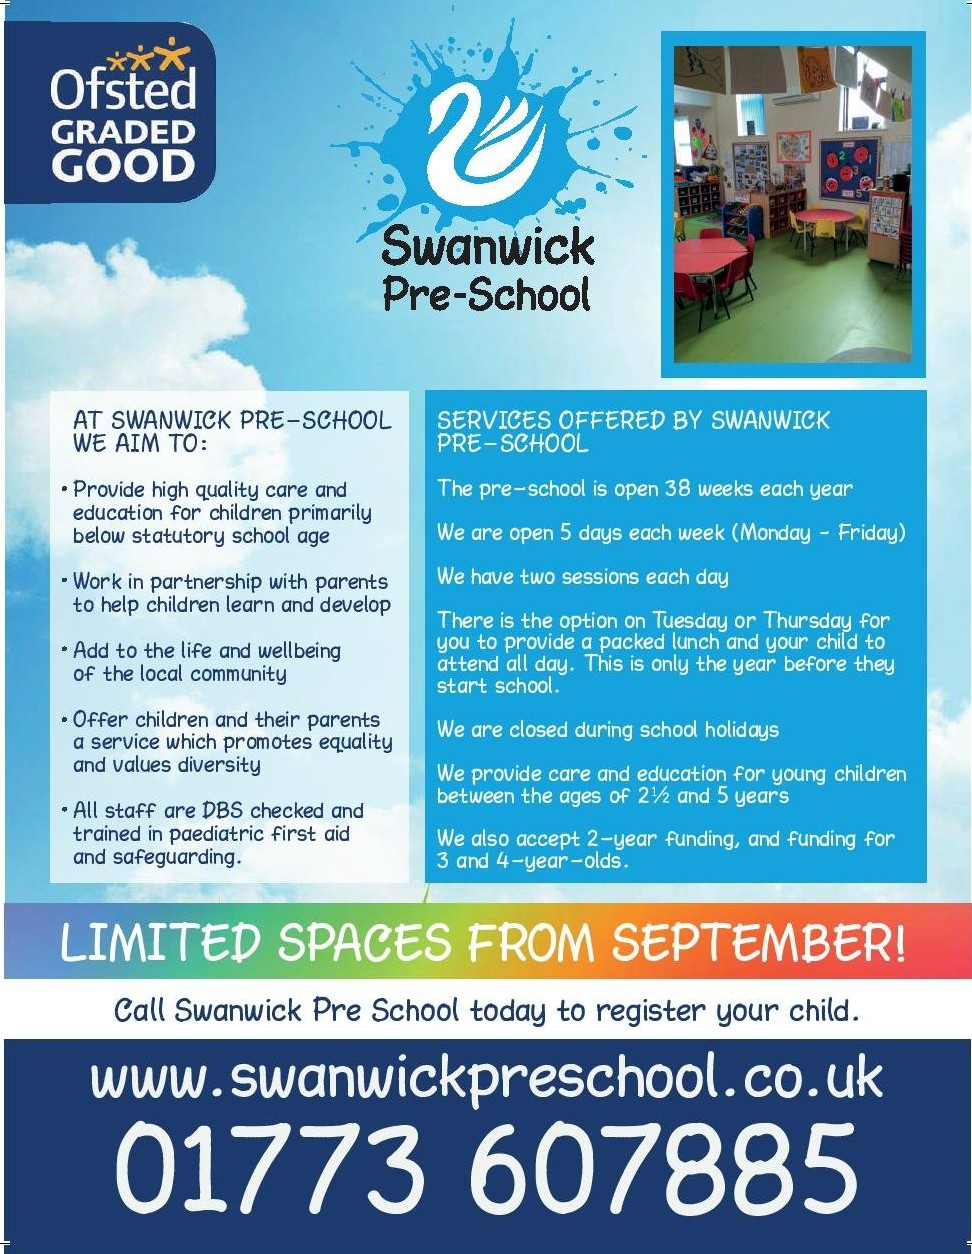 Swanwick Pre-school has places available for a September start